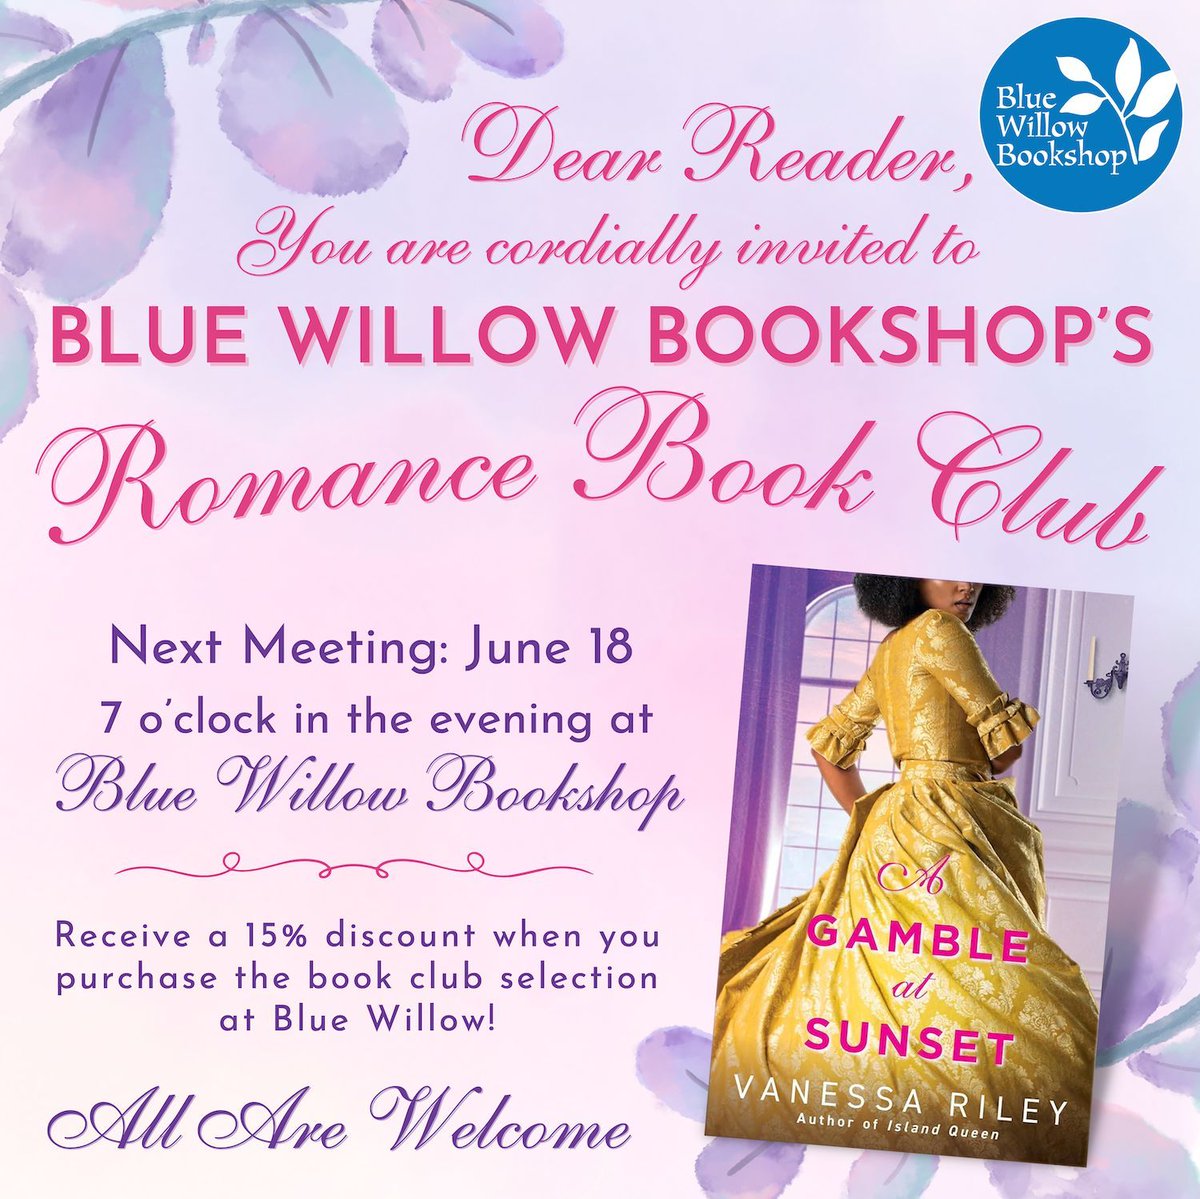 Did you know that Blue Willow has a Romance Book Club? 😍 Join us for our next meeting on June 18! We'll be discussing A GAMBLE AT SUNSET by @VanessaRiley. See details here, and order your book with us for 15% off! bluewillowbookshop.com/event/romance-… @KensingtonBooks